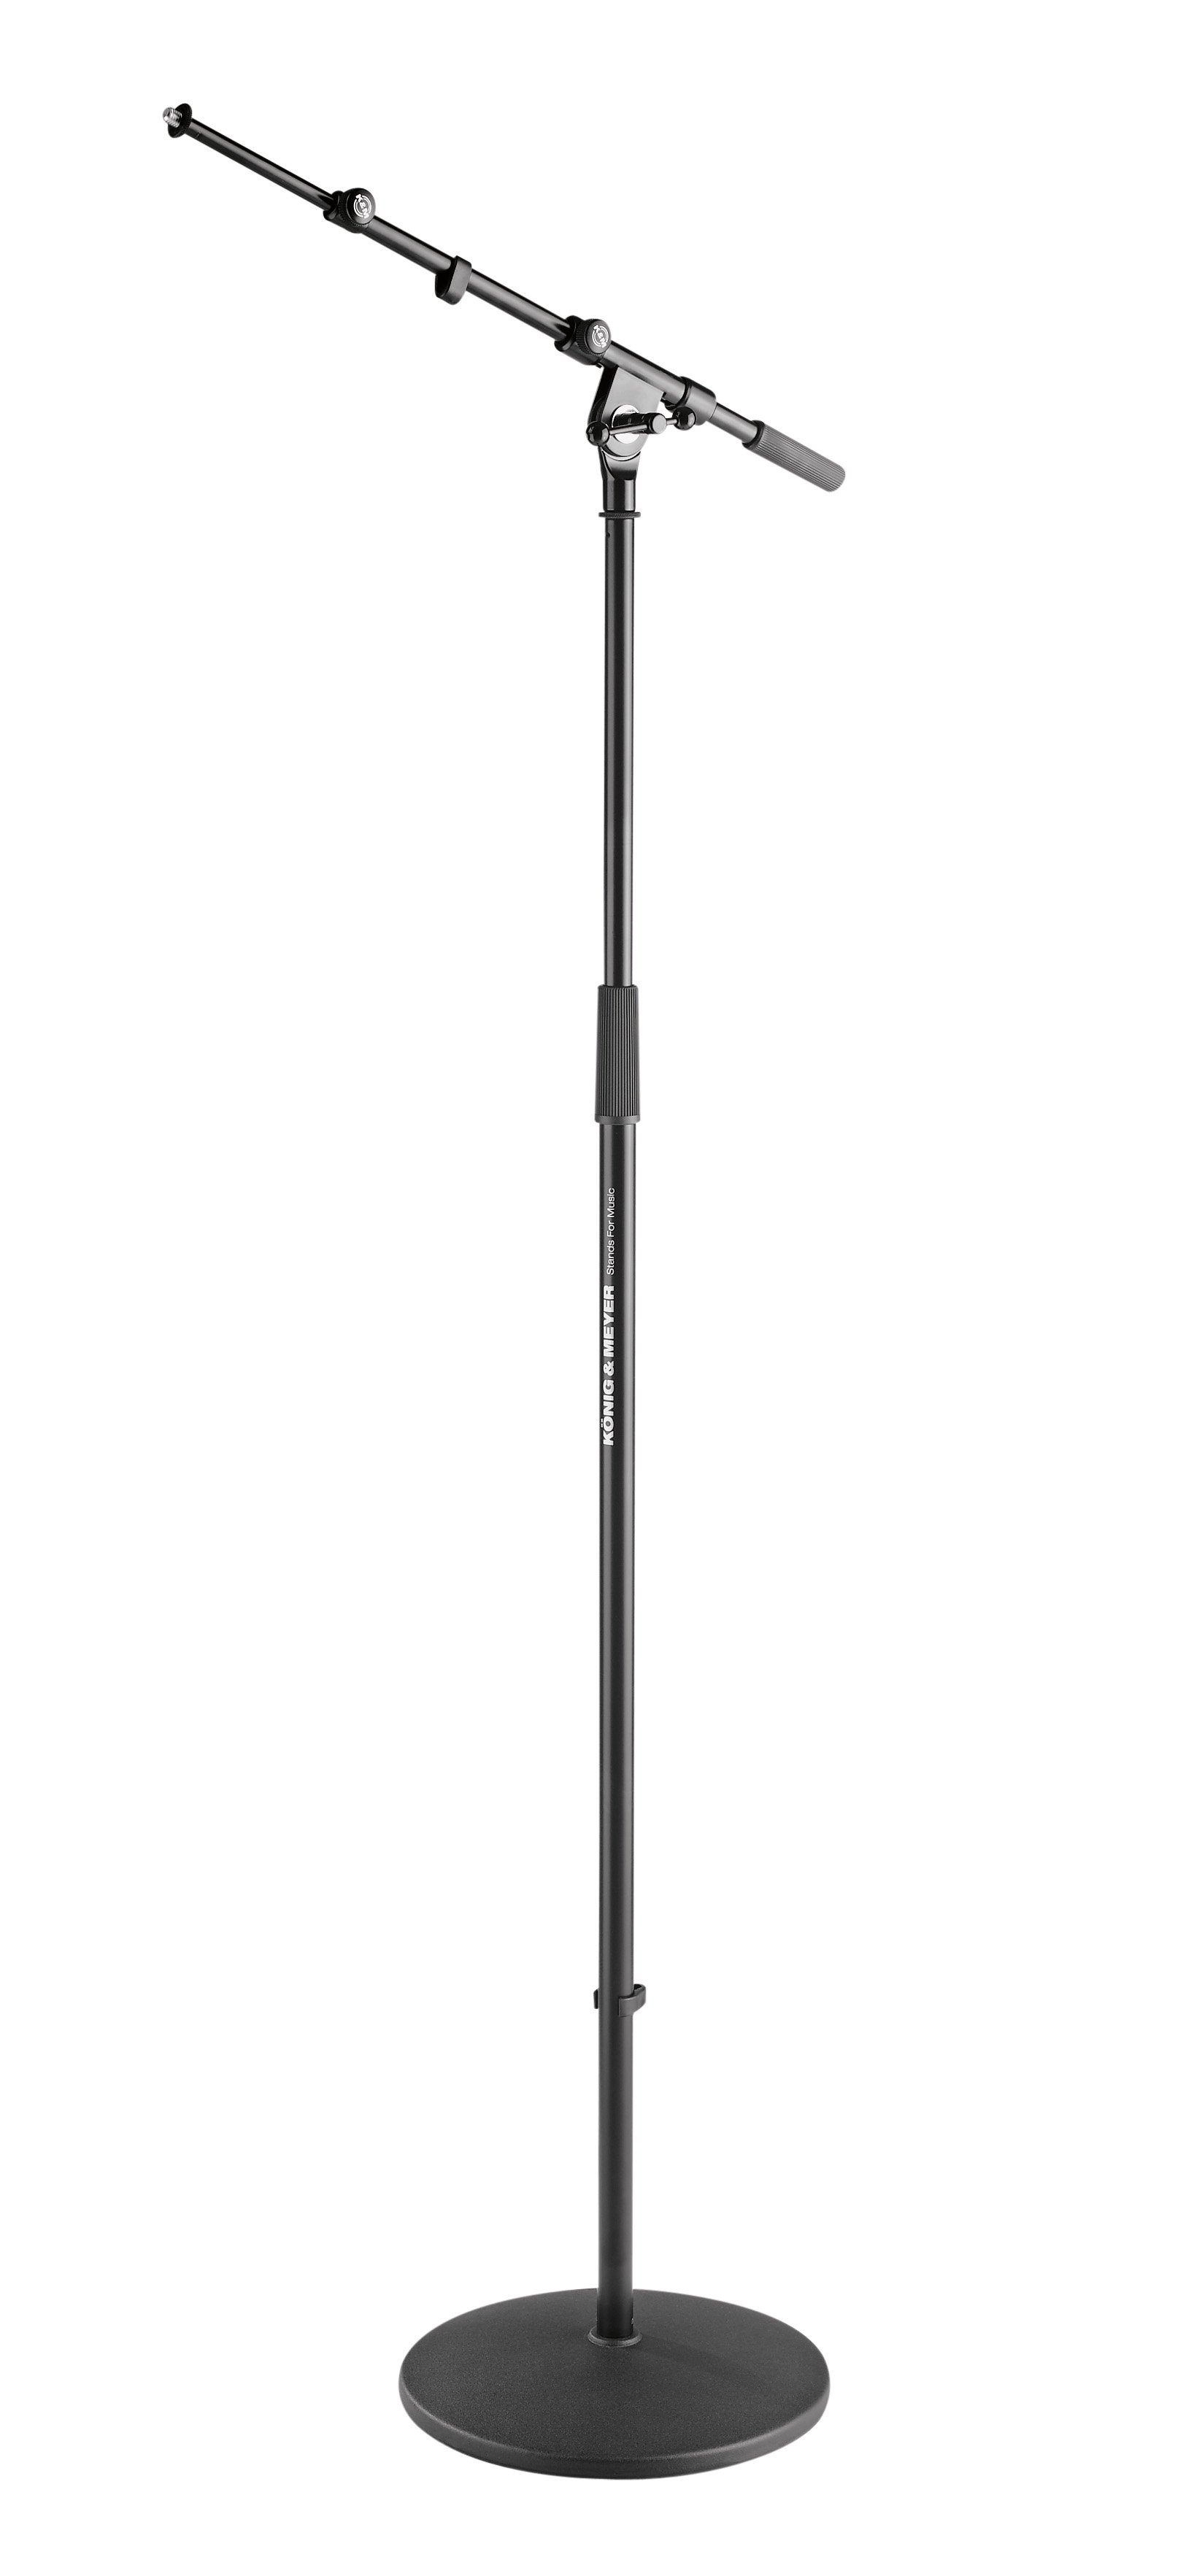 K ＆ M Microphone Stand round base by K ＆ M